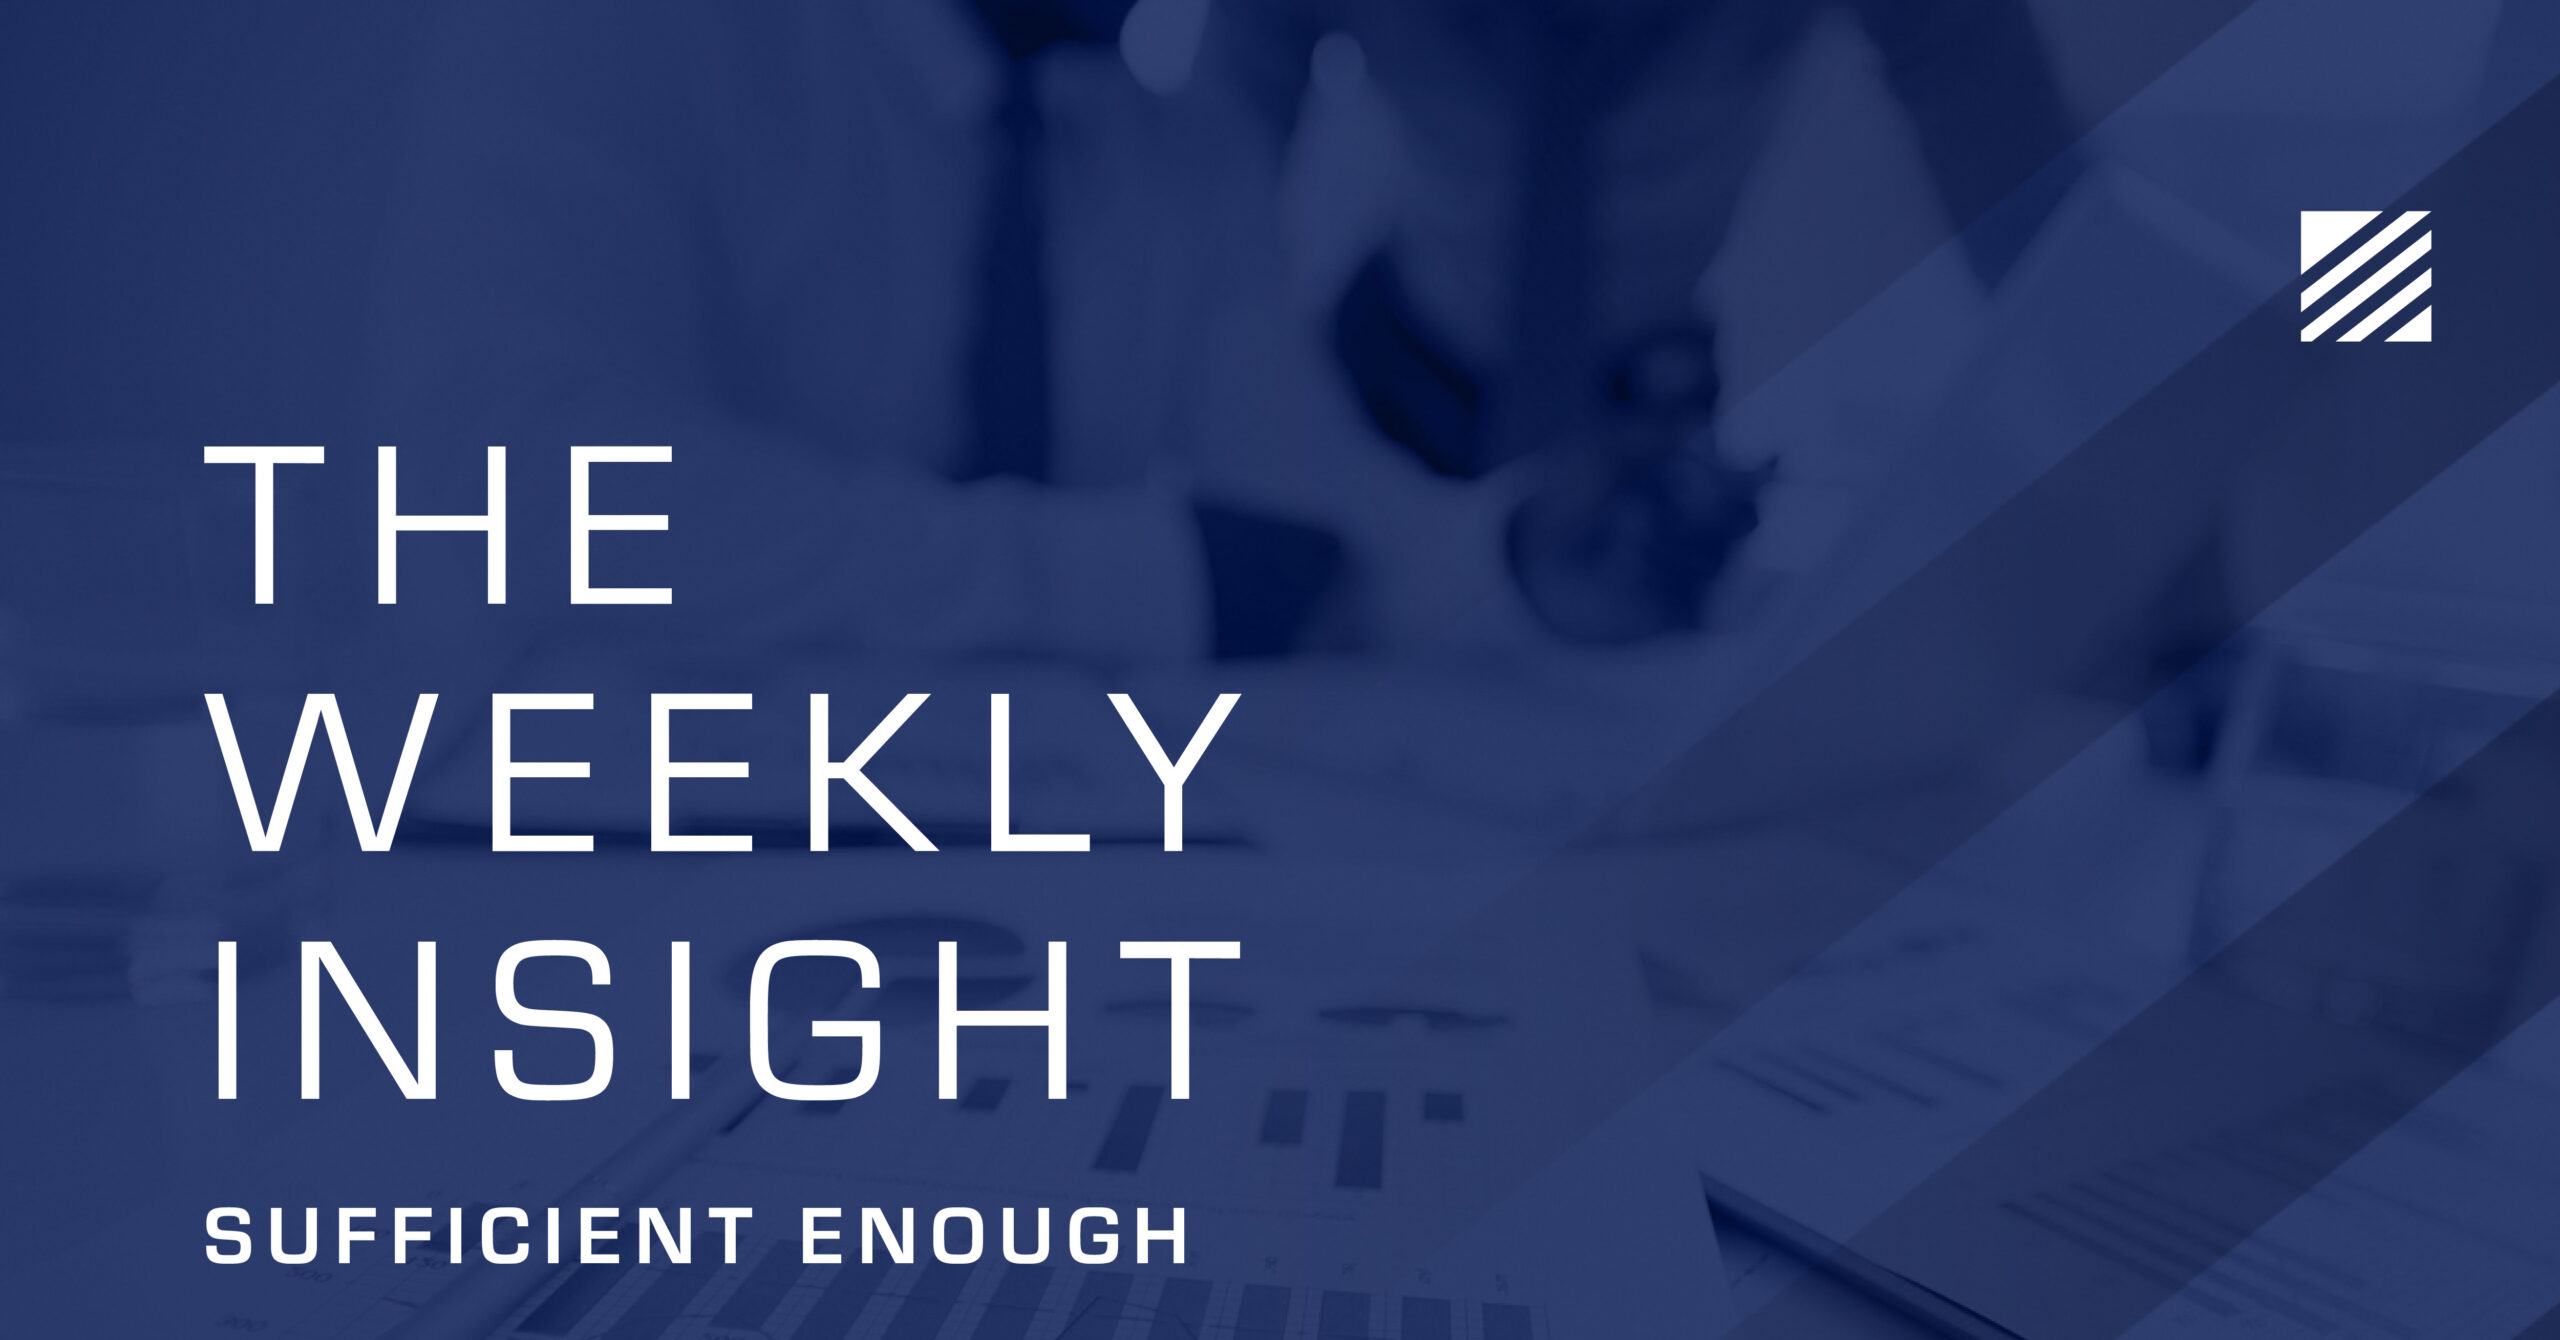 The Weekly Insight: Sufficient Enough Graphic